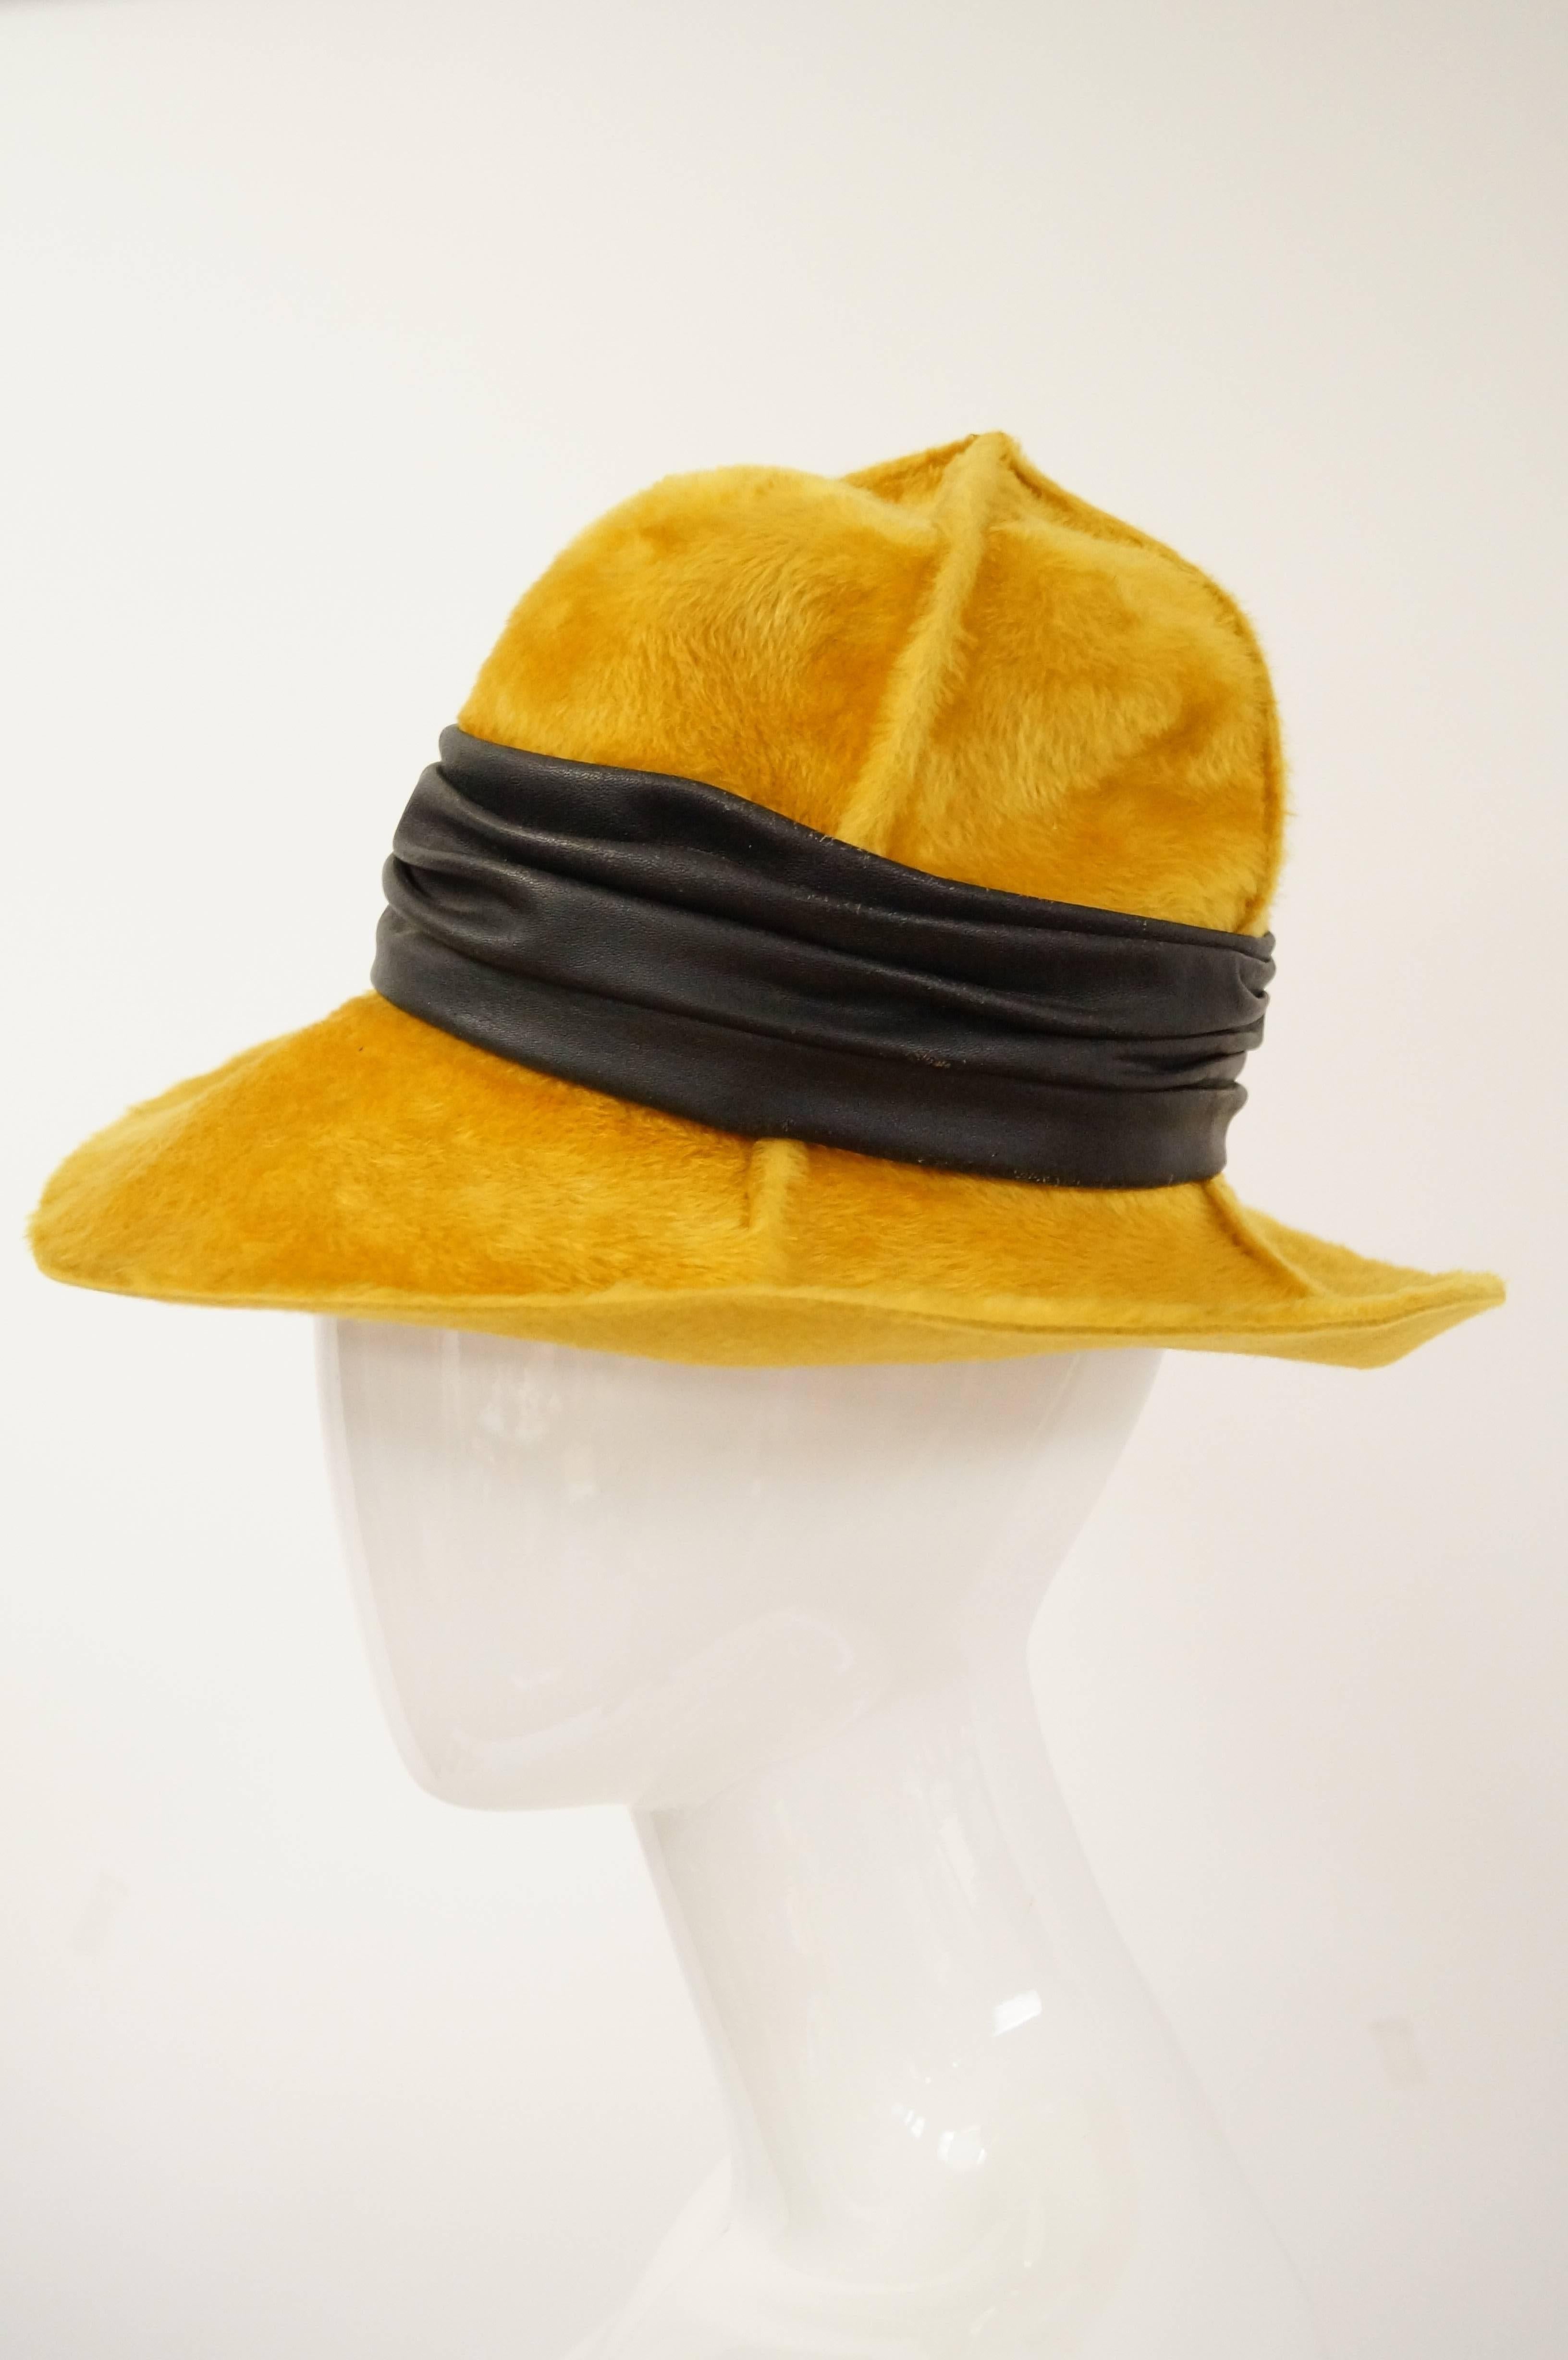 Fabulous wide brim hat by Christian Dior in soft, velveteen fabric. The hat has a tall crown composed of four panels stitched together in an "x." The hat features a wide, ruched leather ribbon.

Small 21"